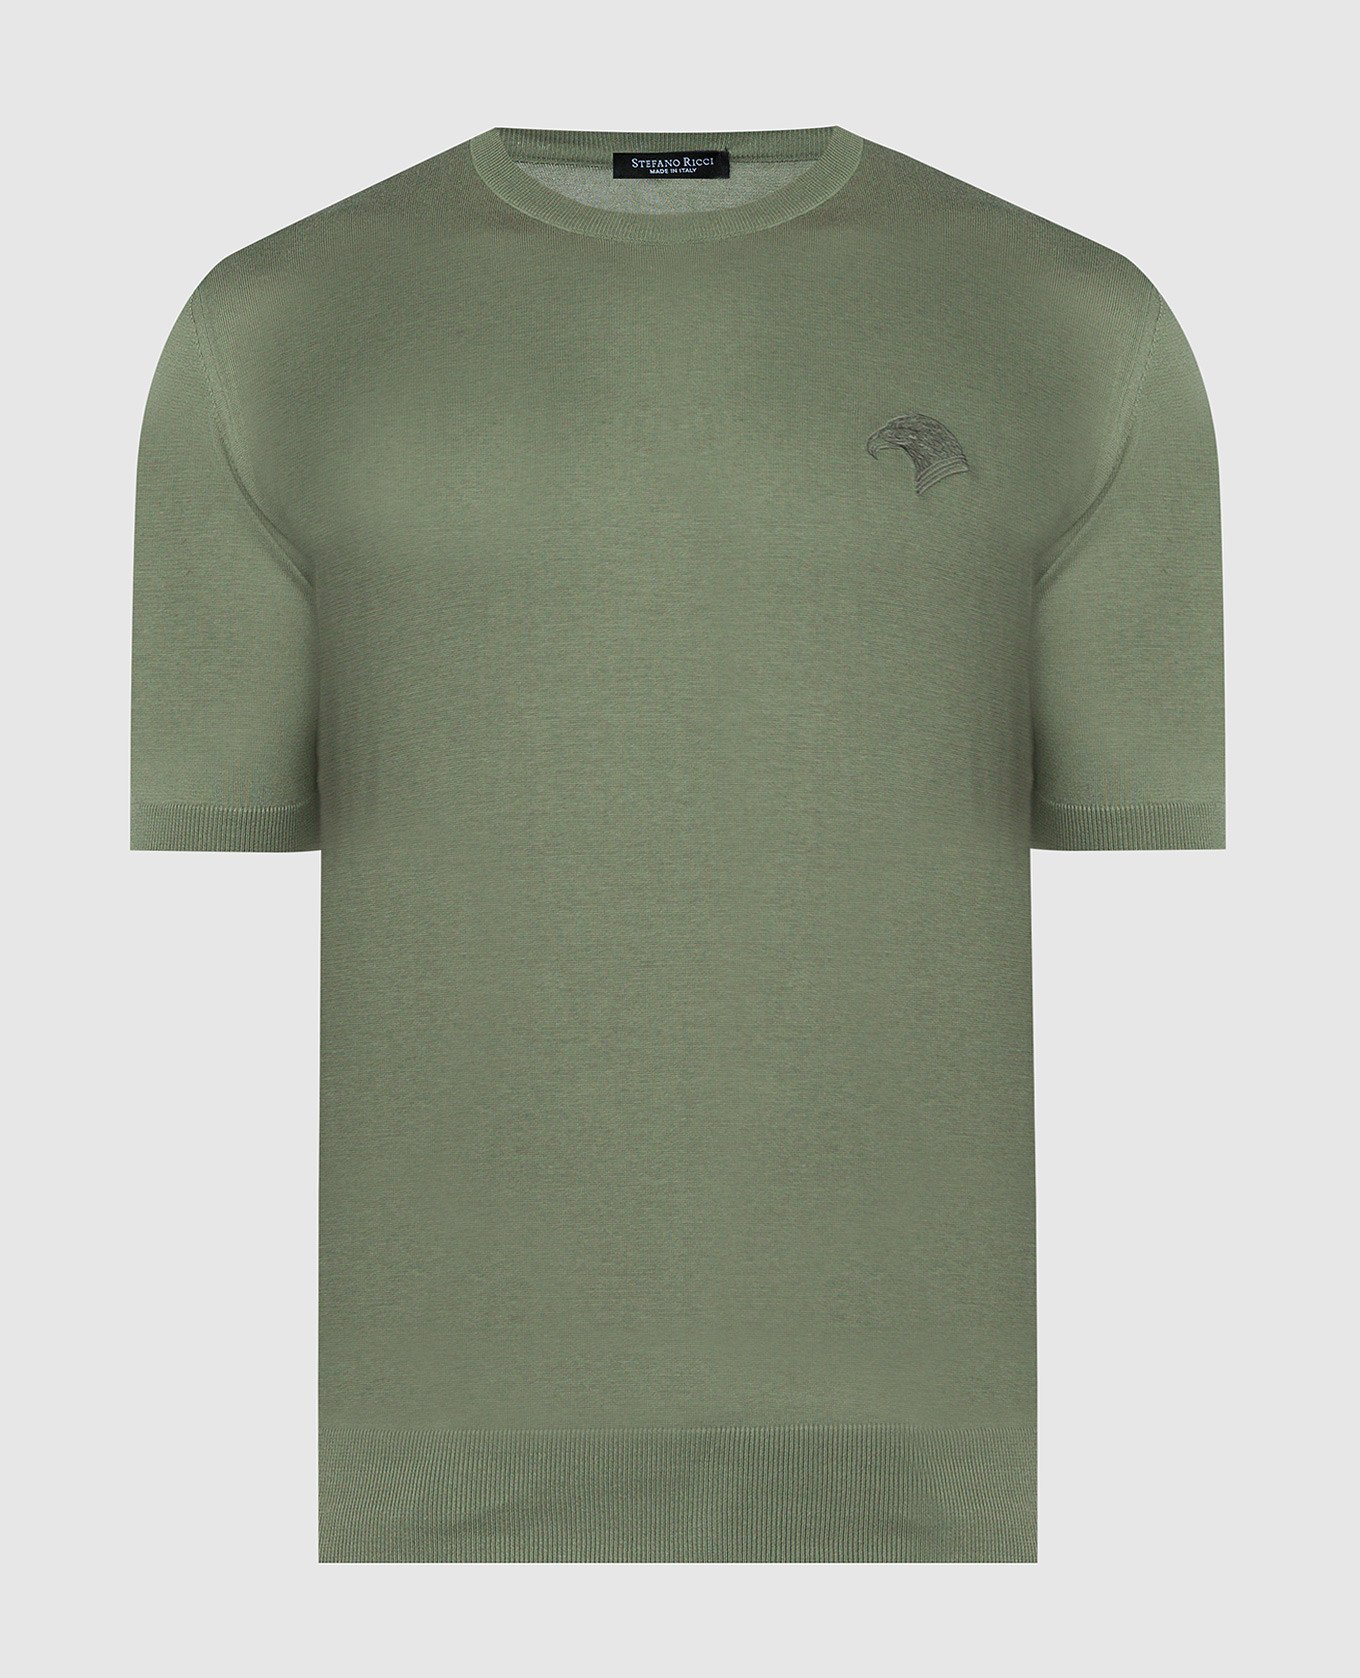 Green t-shirt with logo emblem embroidery